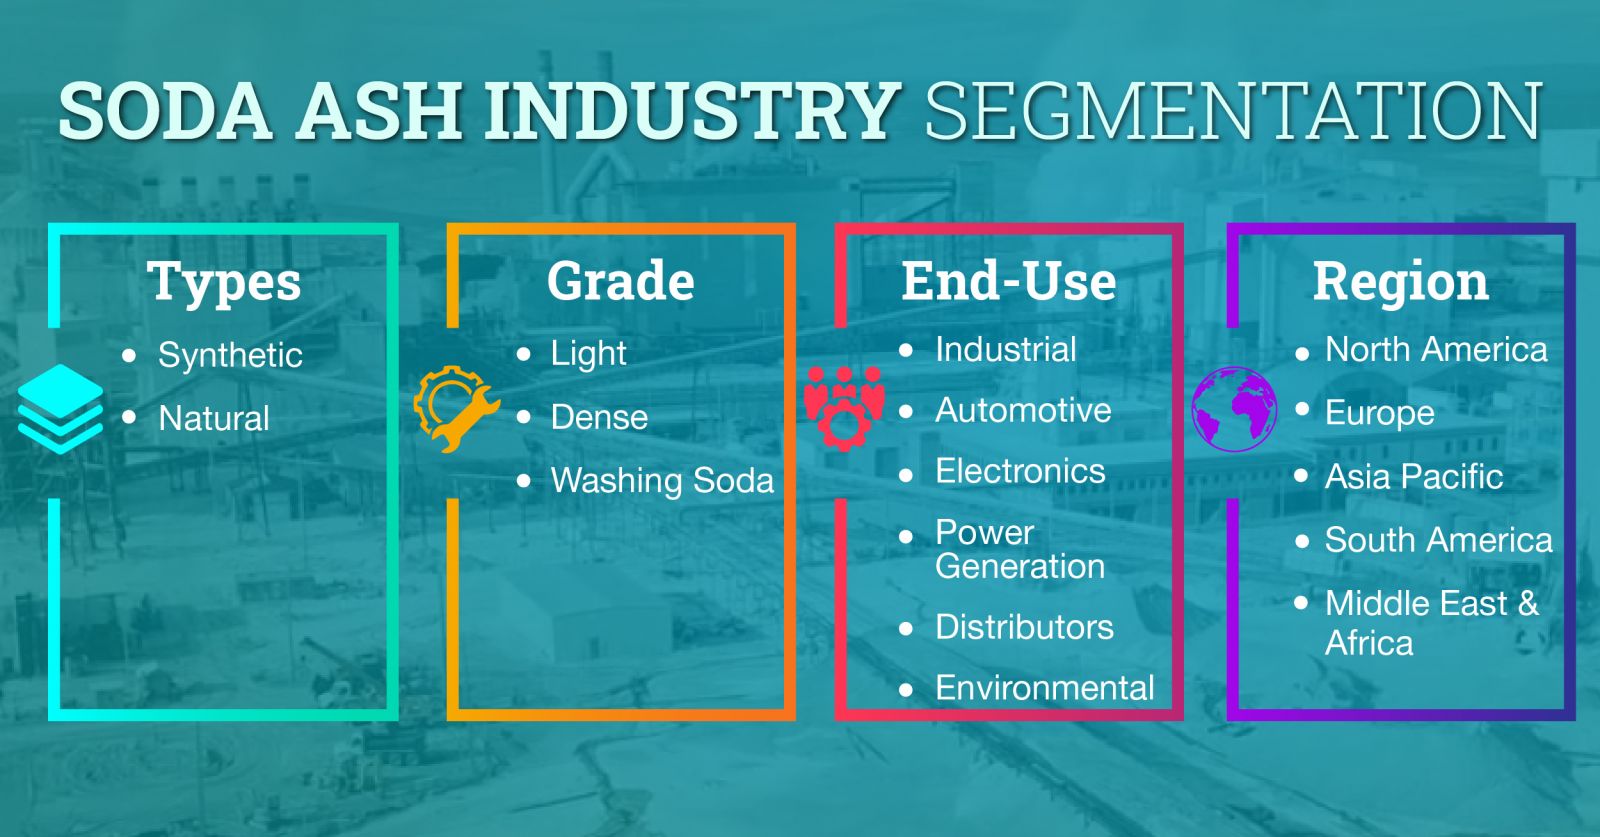 Soda ash market is segmented into types, grade, end-use, and region